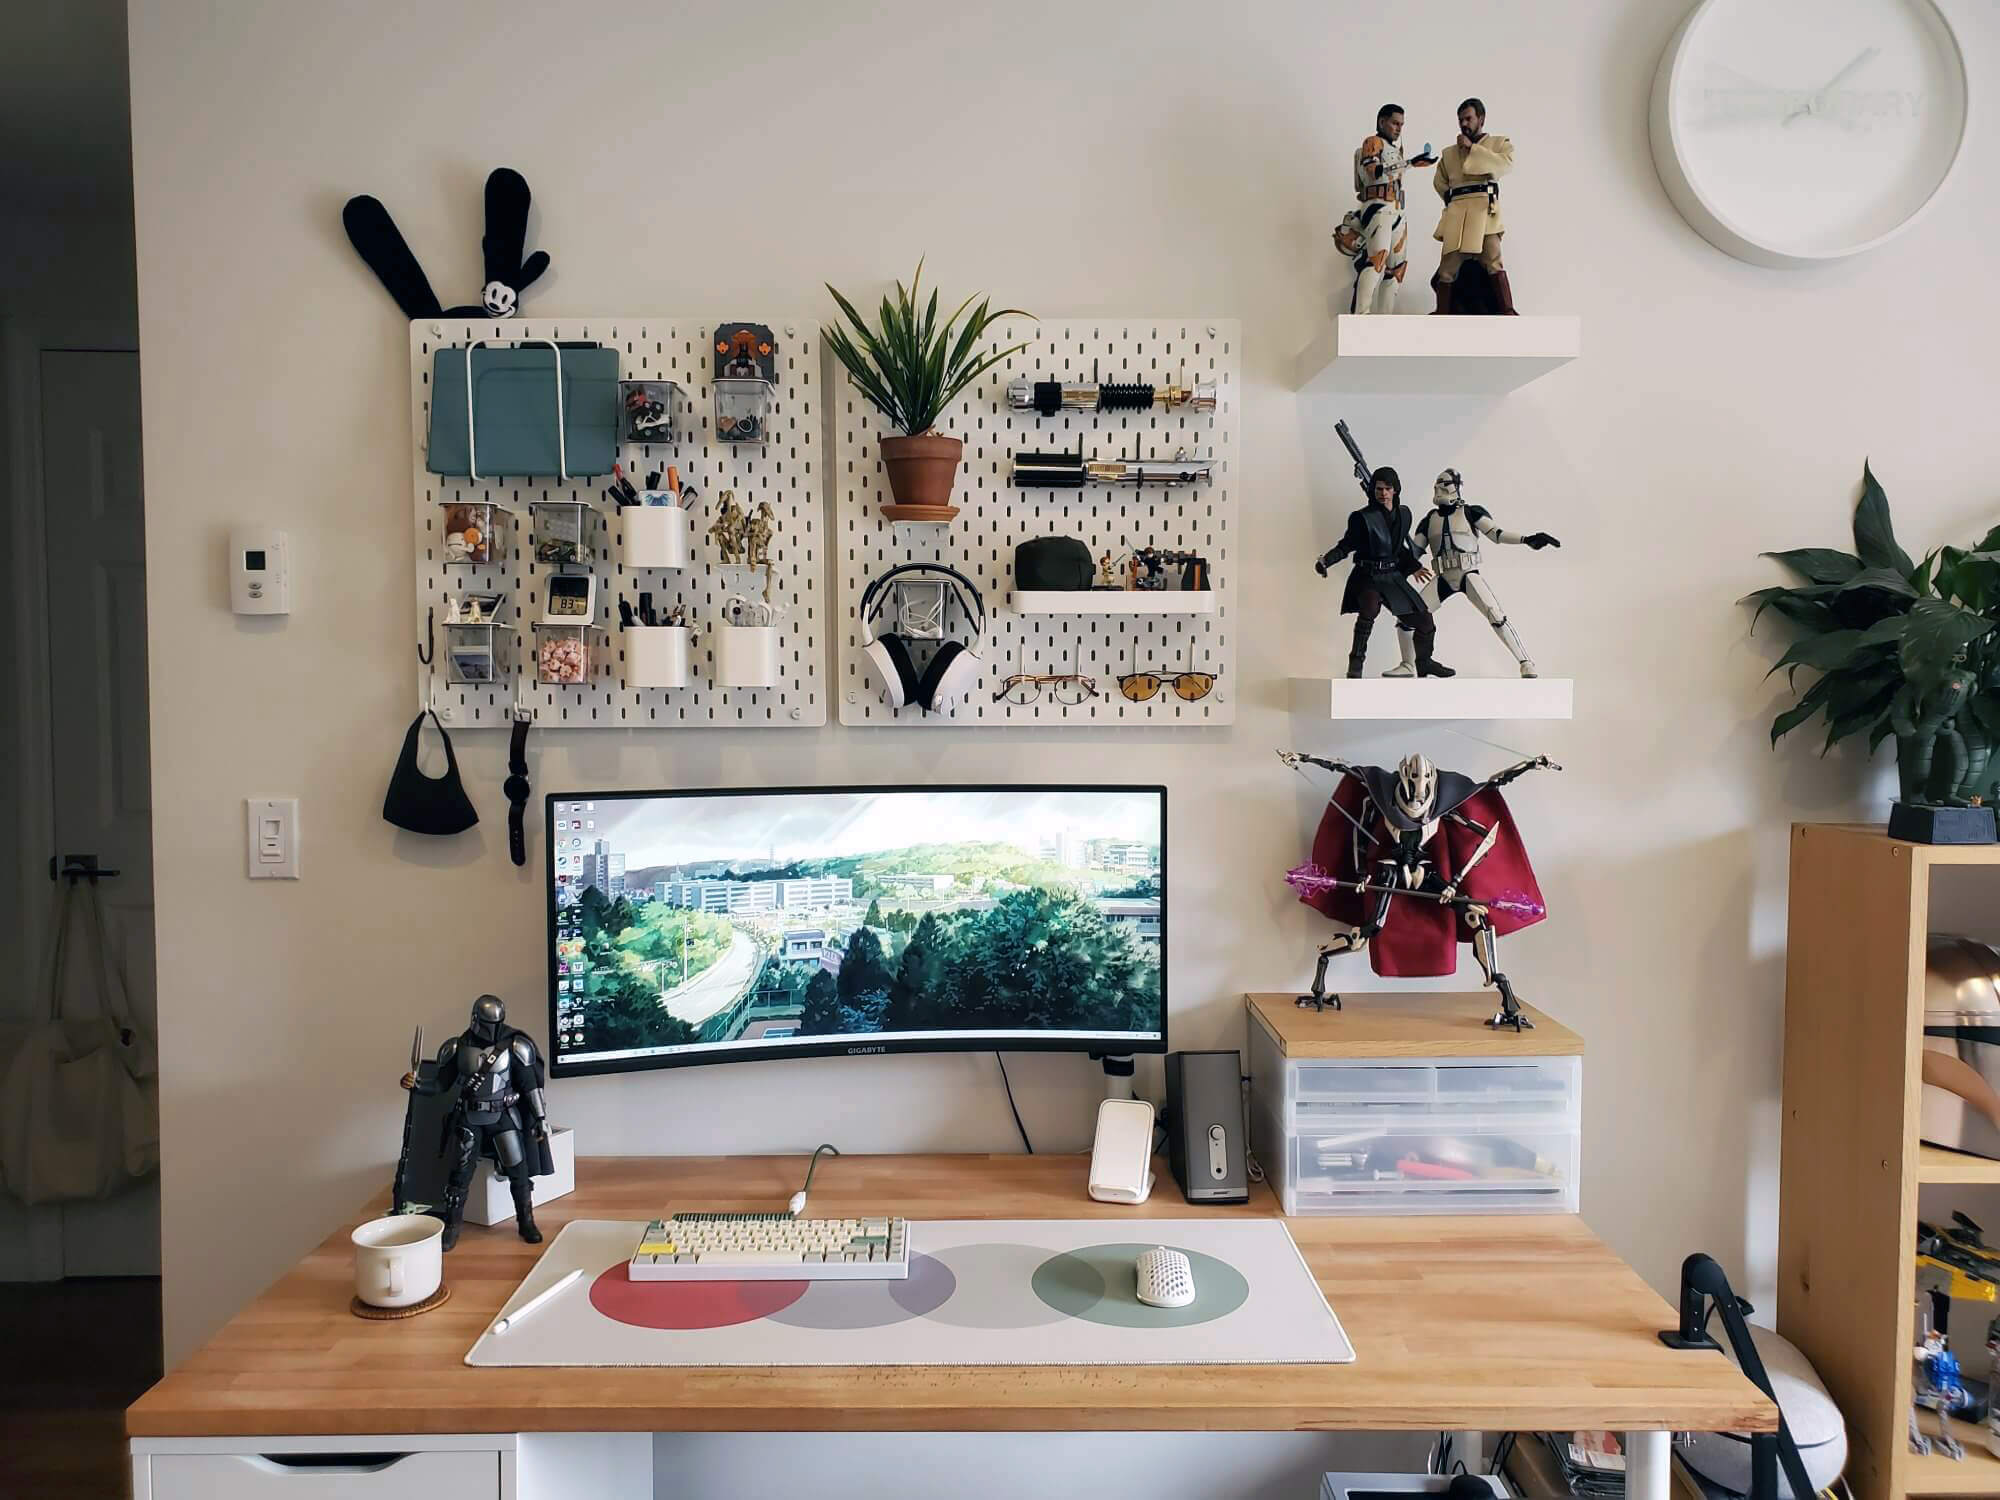 When designing his WFH battlestation, Ryoma drew inspiration from Japanese minimalism and Scandinavian practicality